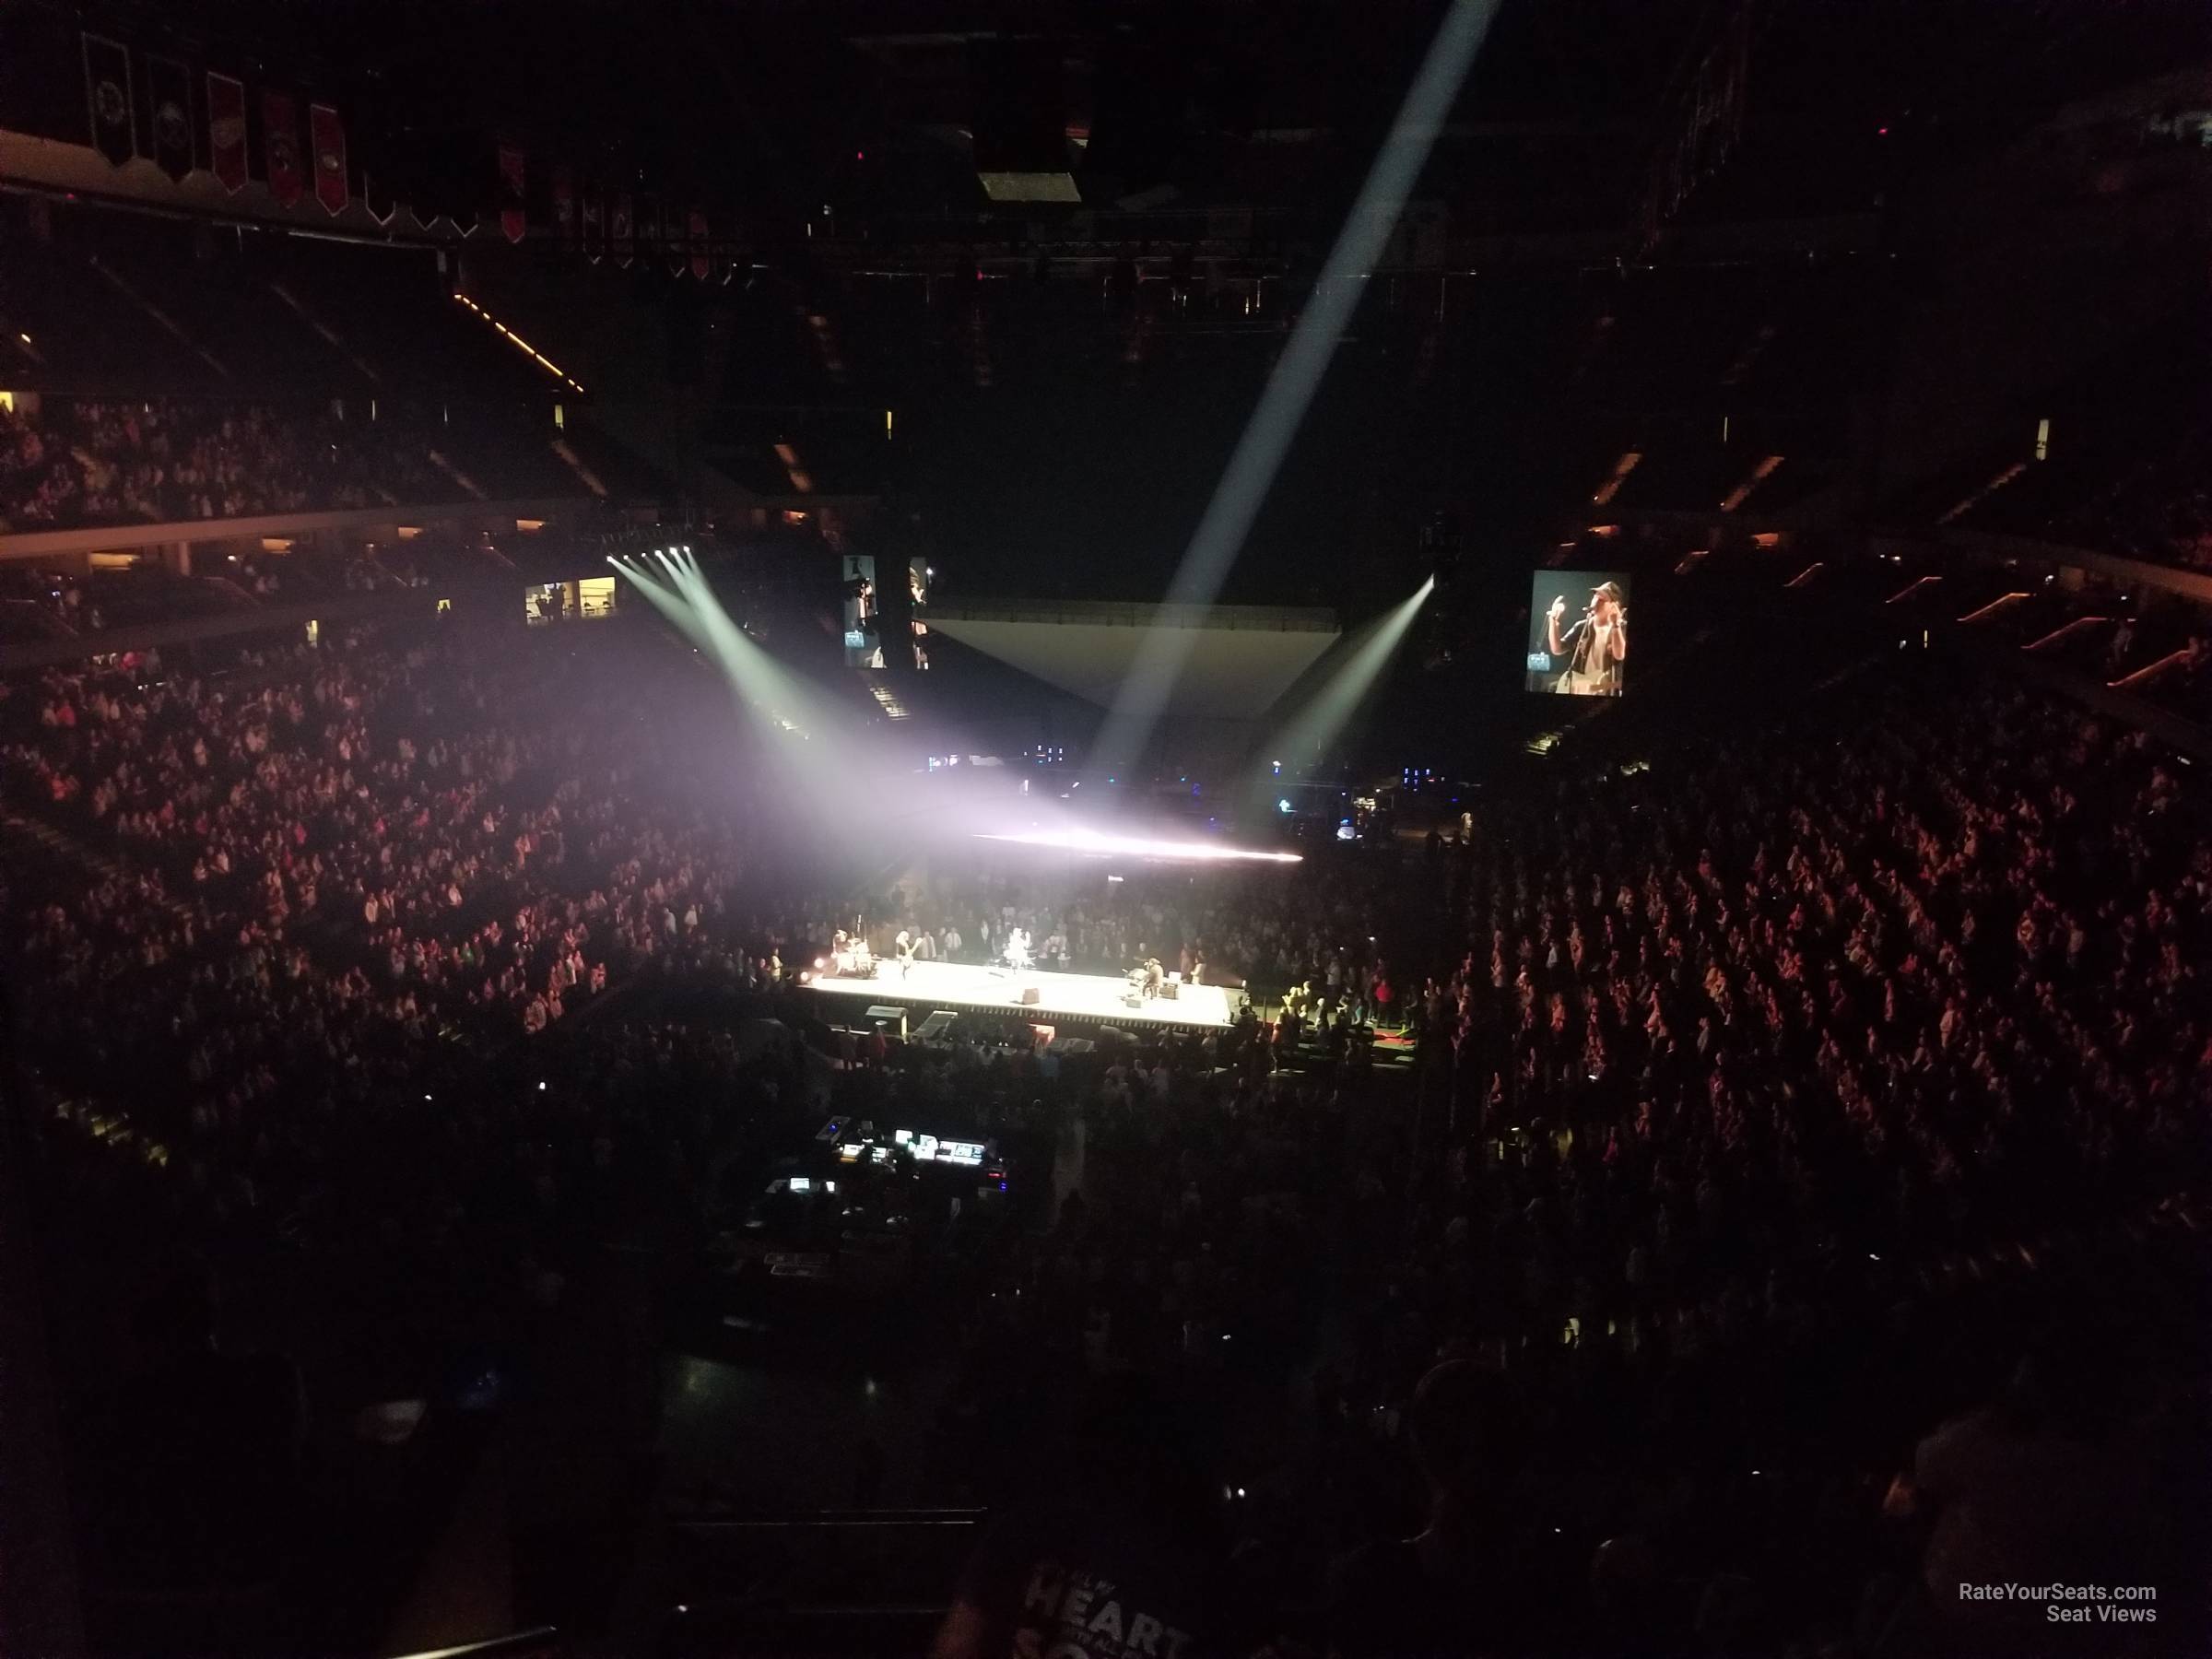 head-on concert view at Xcel Energy Center